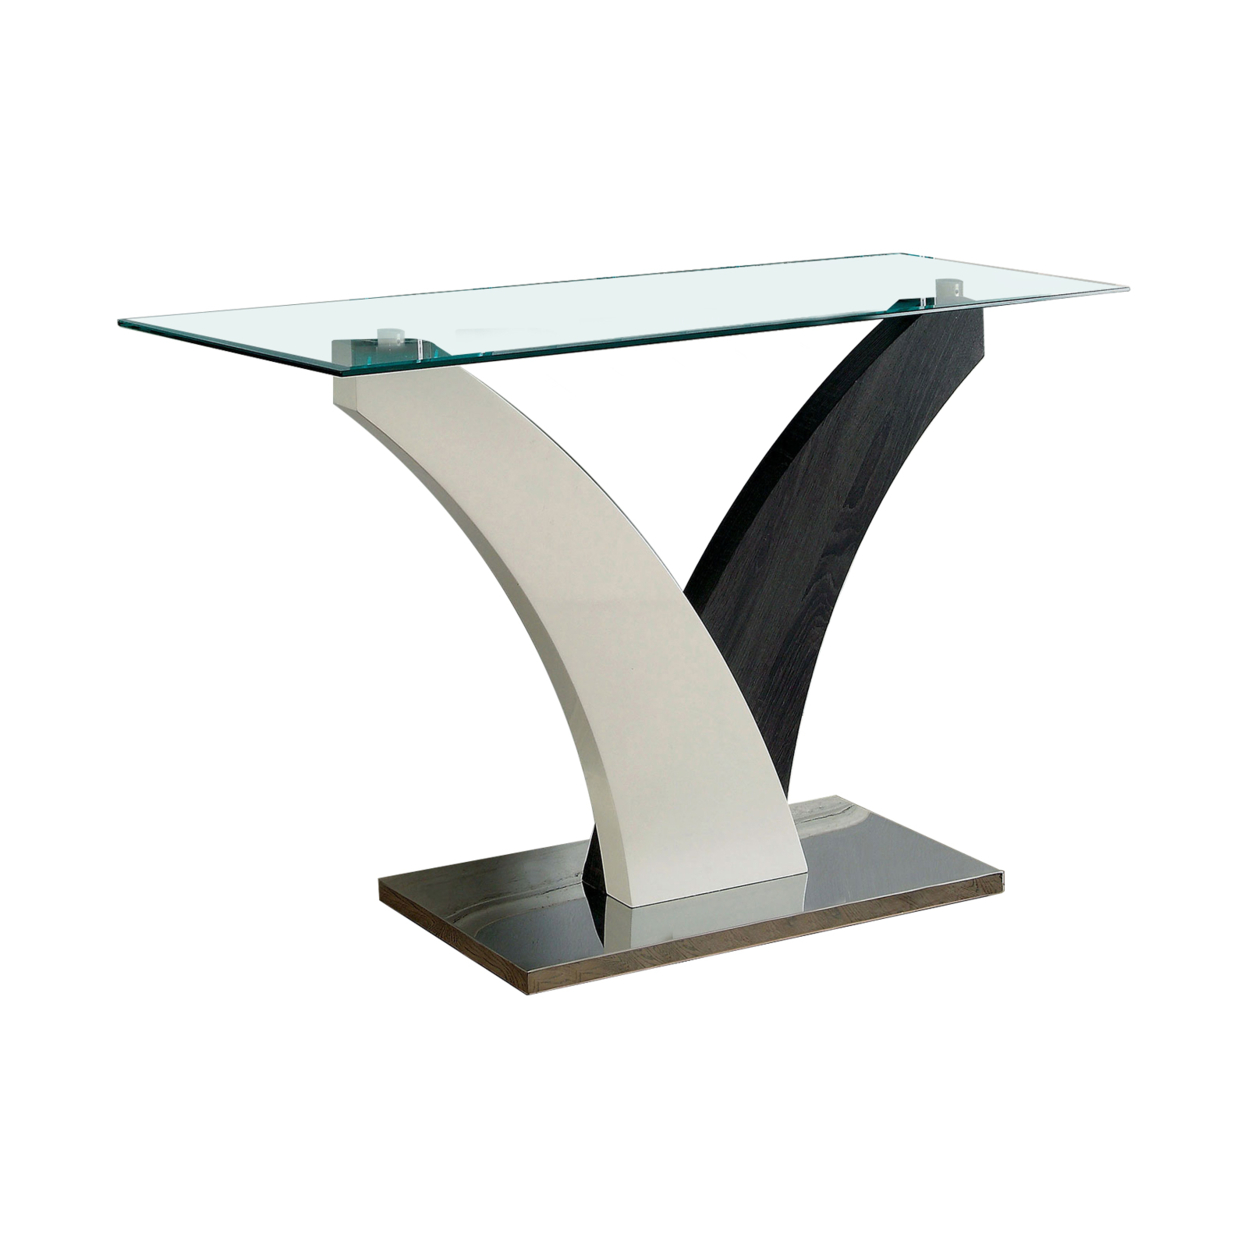 Sofa Table With Curved V Base And Rectangular Glass Top, White And Gray- Saltoro Sherpi